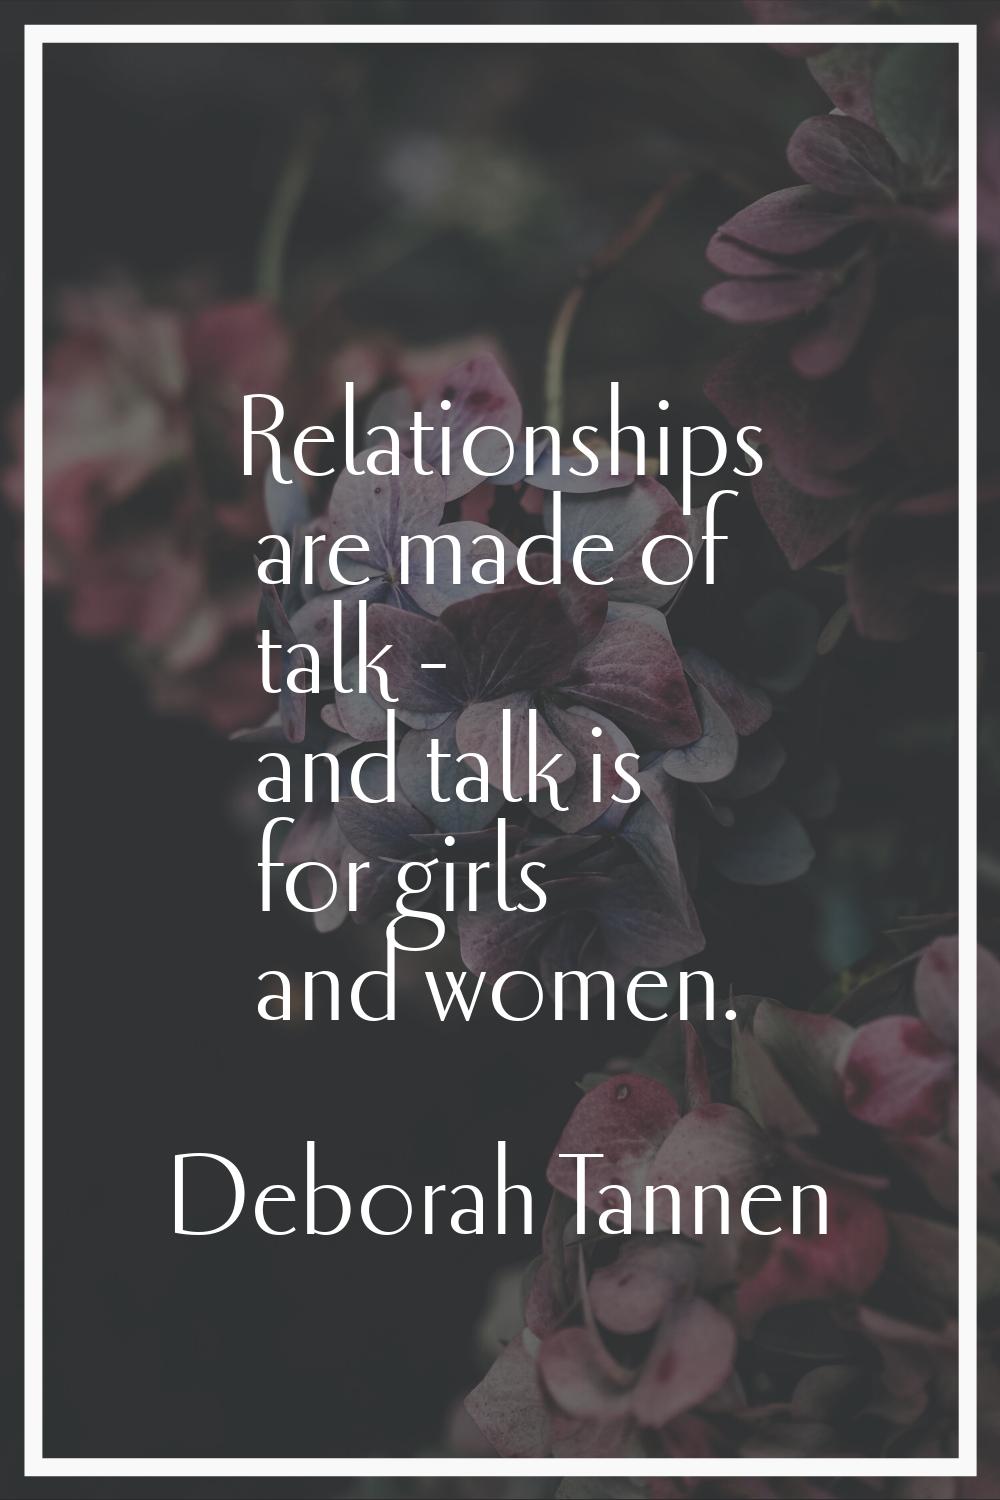 Relationships are made of talk - and talk is for girls and women.